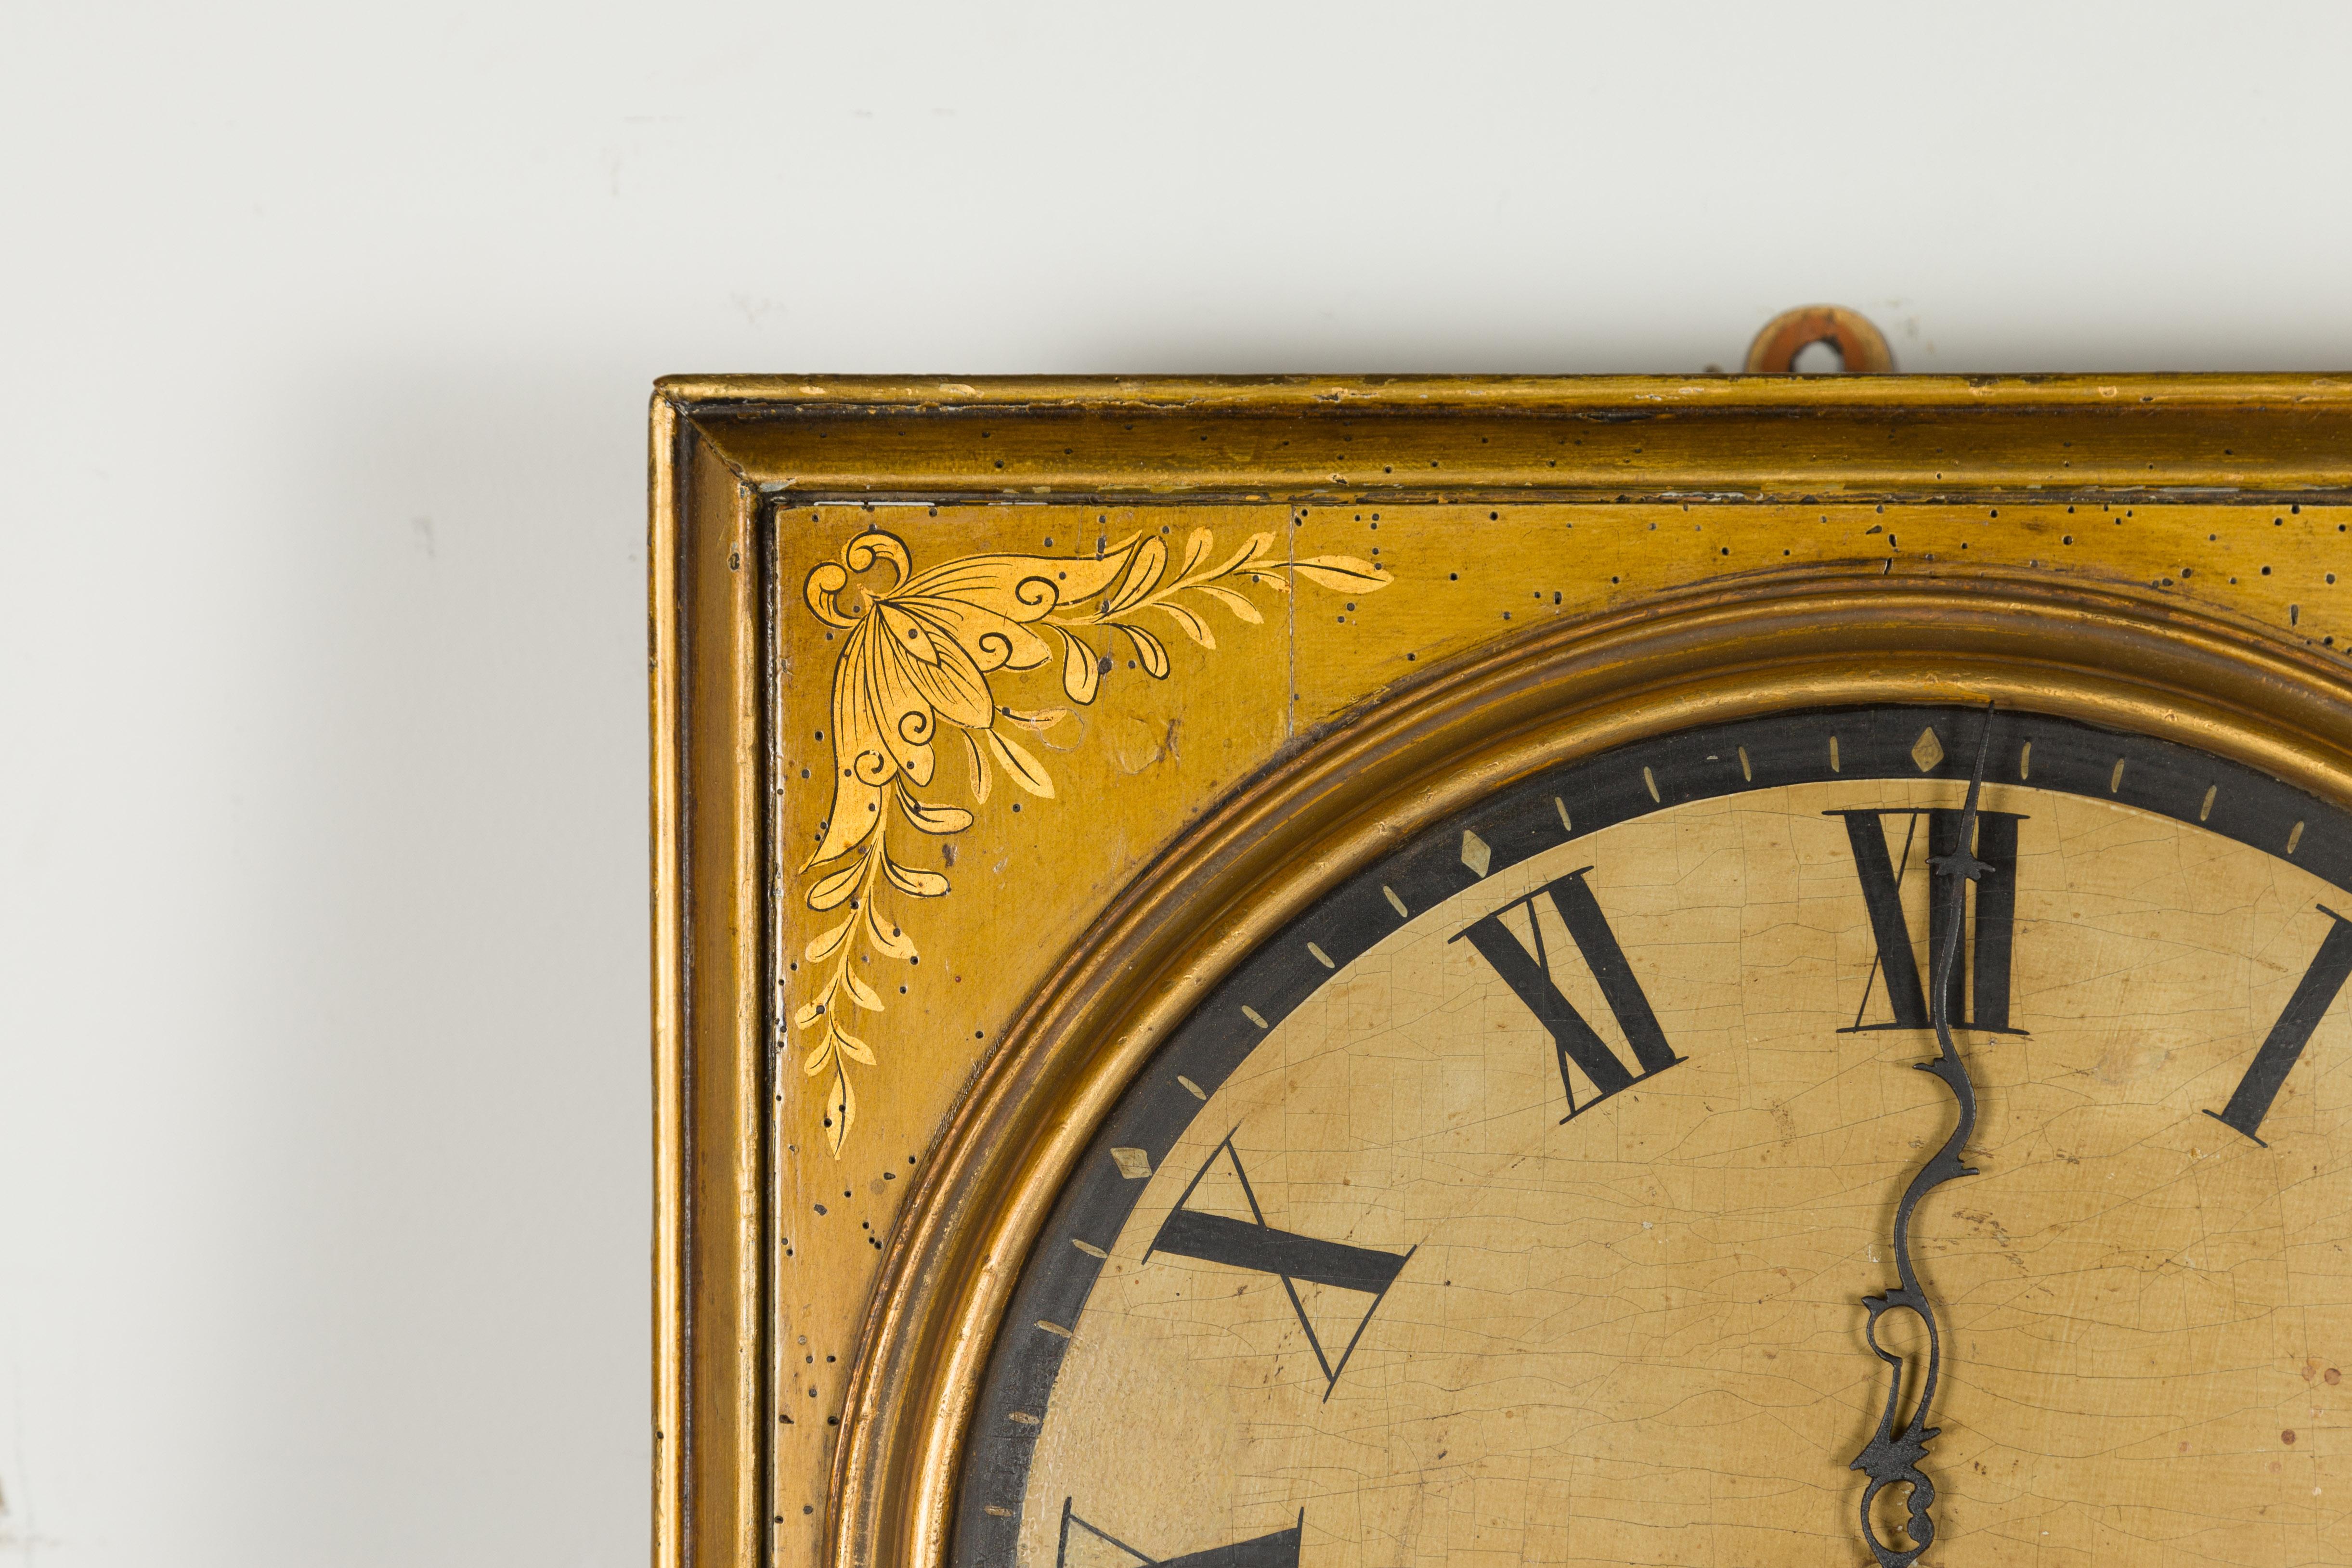 English Regency Period 1820s Golden Toned Wall Clock with Chinoiserie Décor In Good Condition For Sale In Atlanta, GA